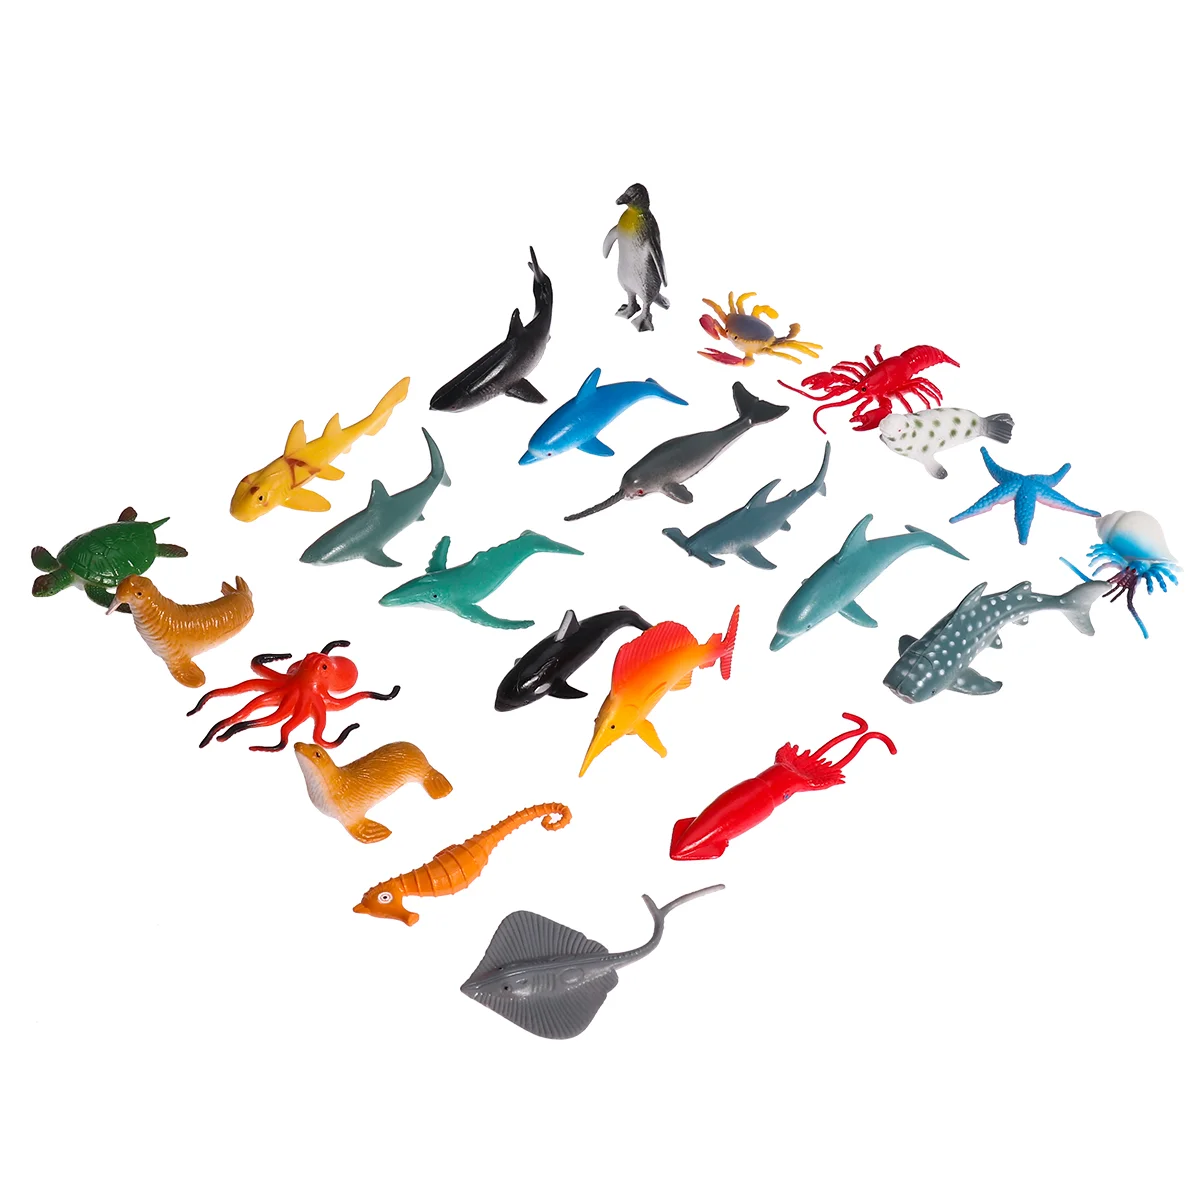 

TOYMYTOY 24pcs Plastic Sea Animal Figure Set Realistic Animal Toys Mini Sea Animal Party Favors For Kids Toddlers (Mix Model)